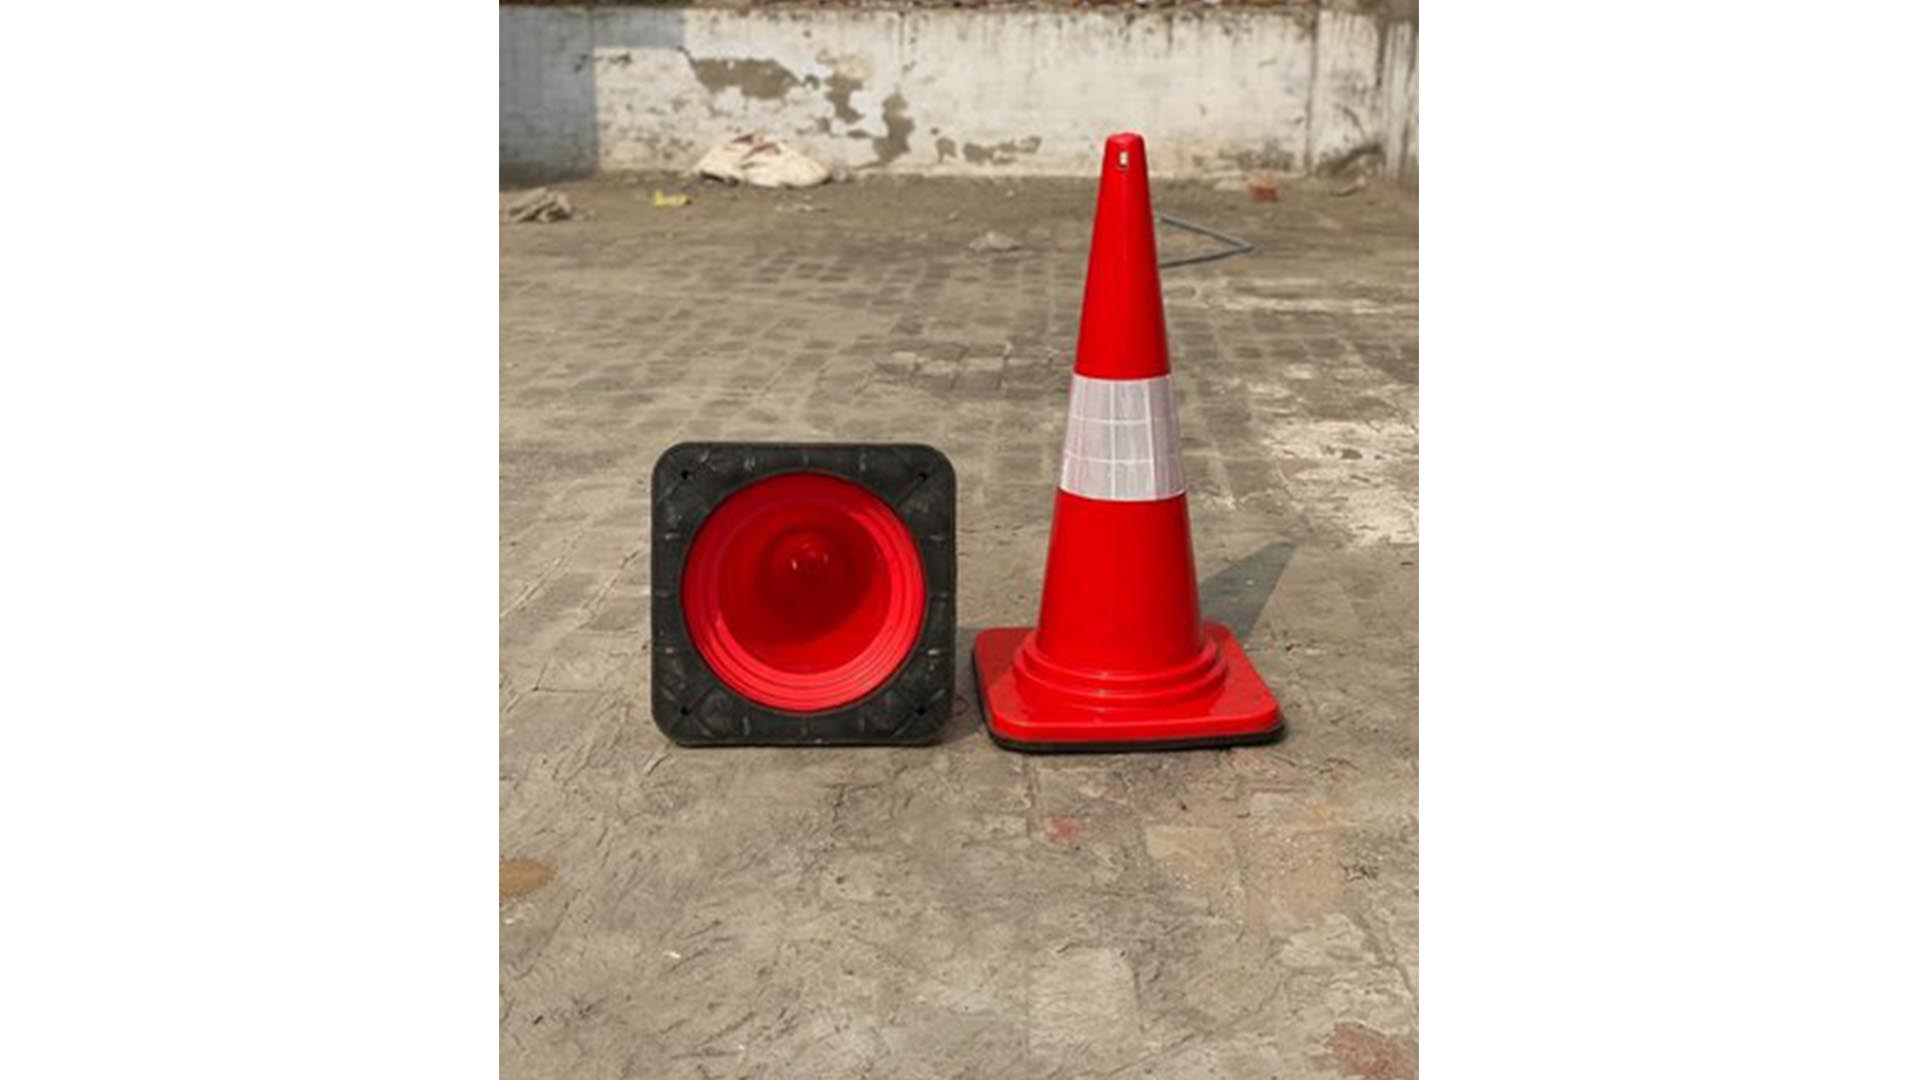 Lalitpur Metropolitan City handed over rubber cones to the Traffic Police Division